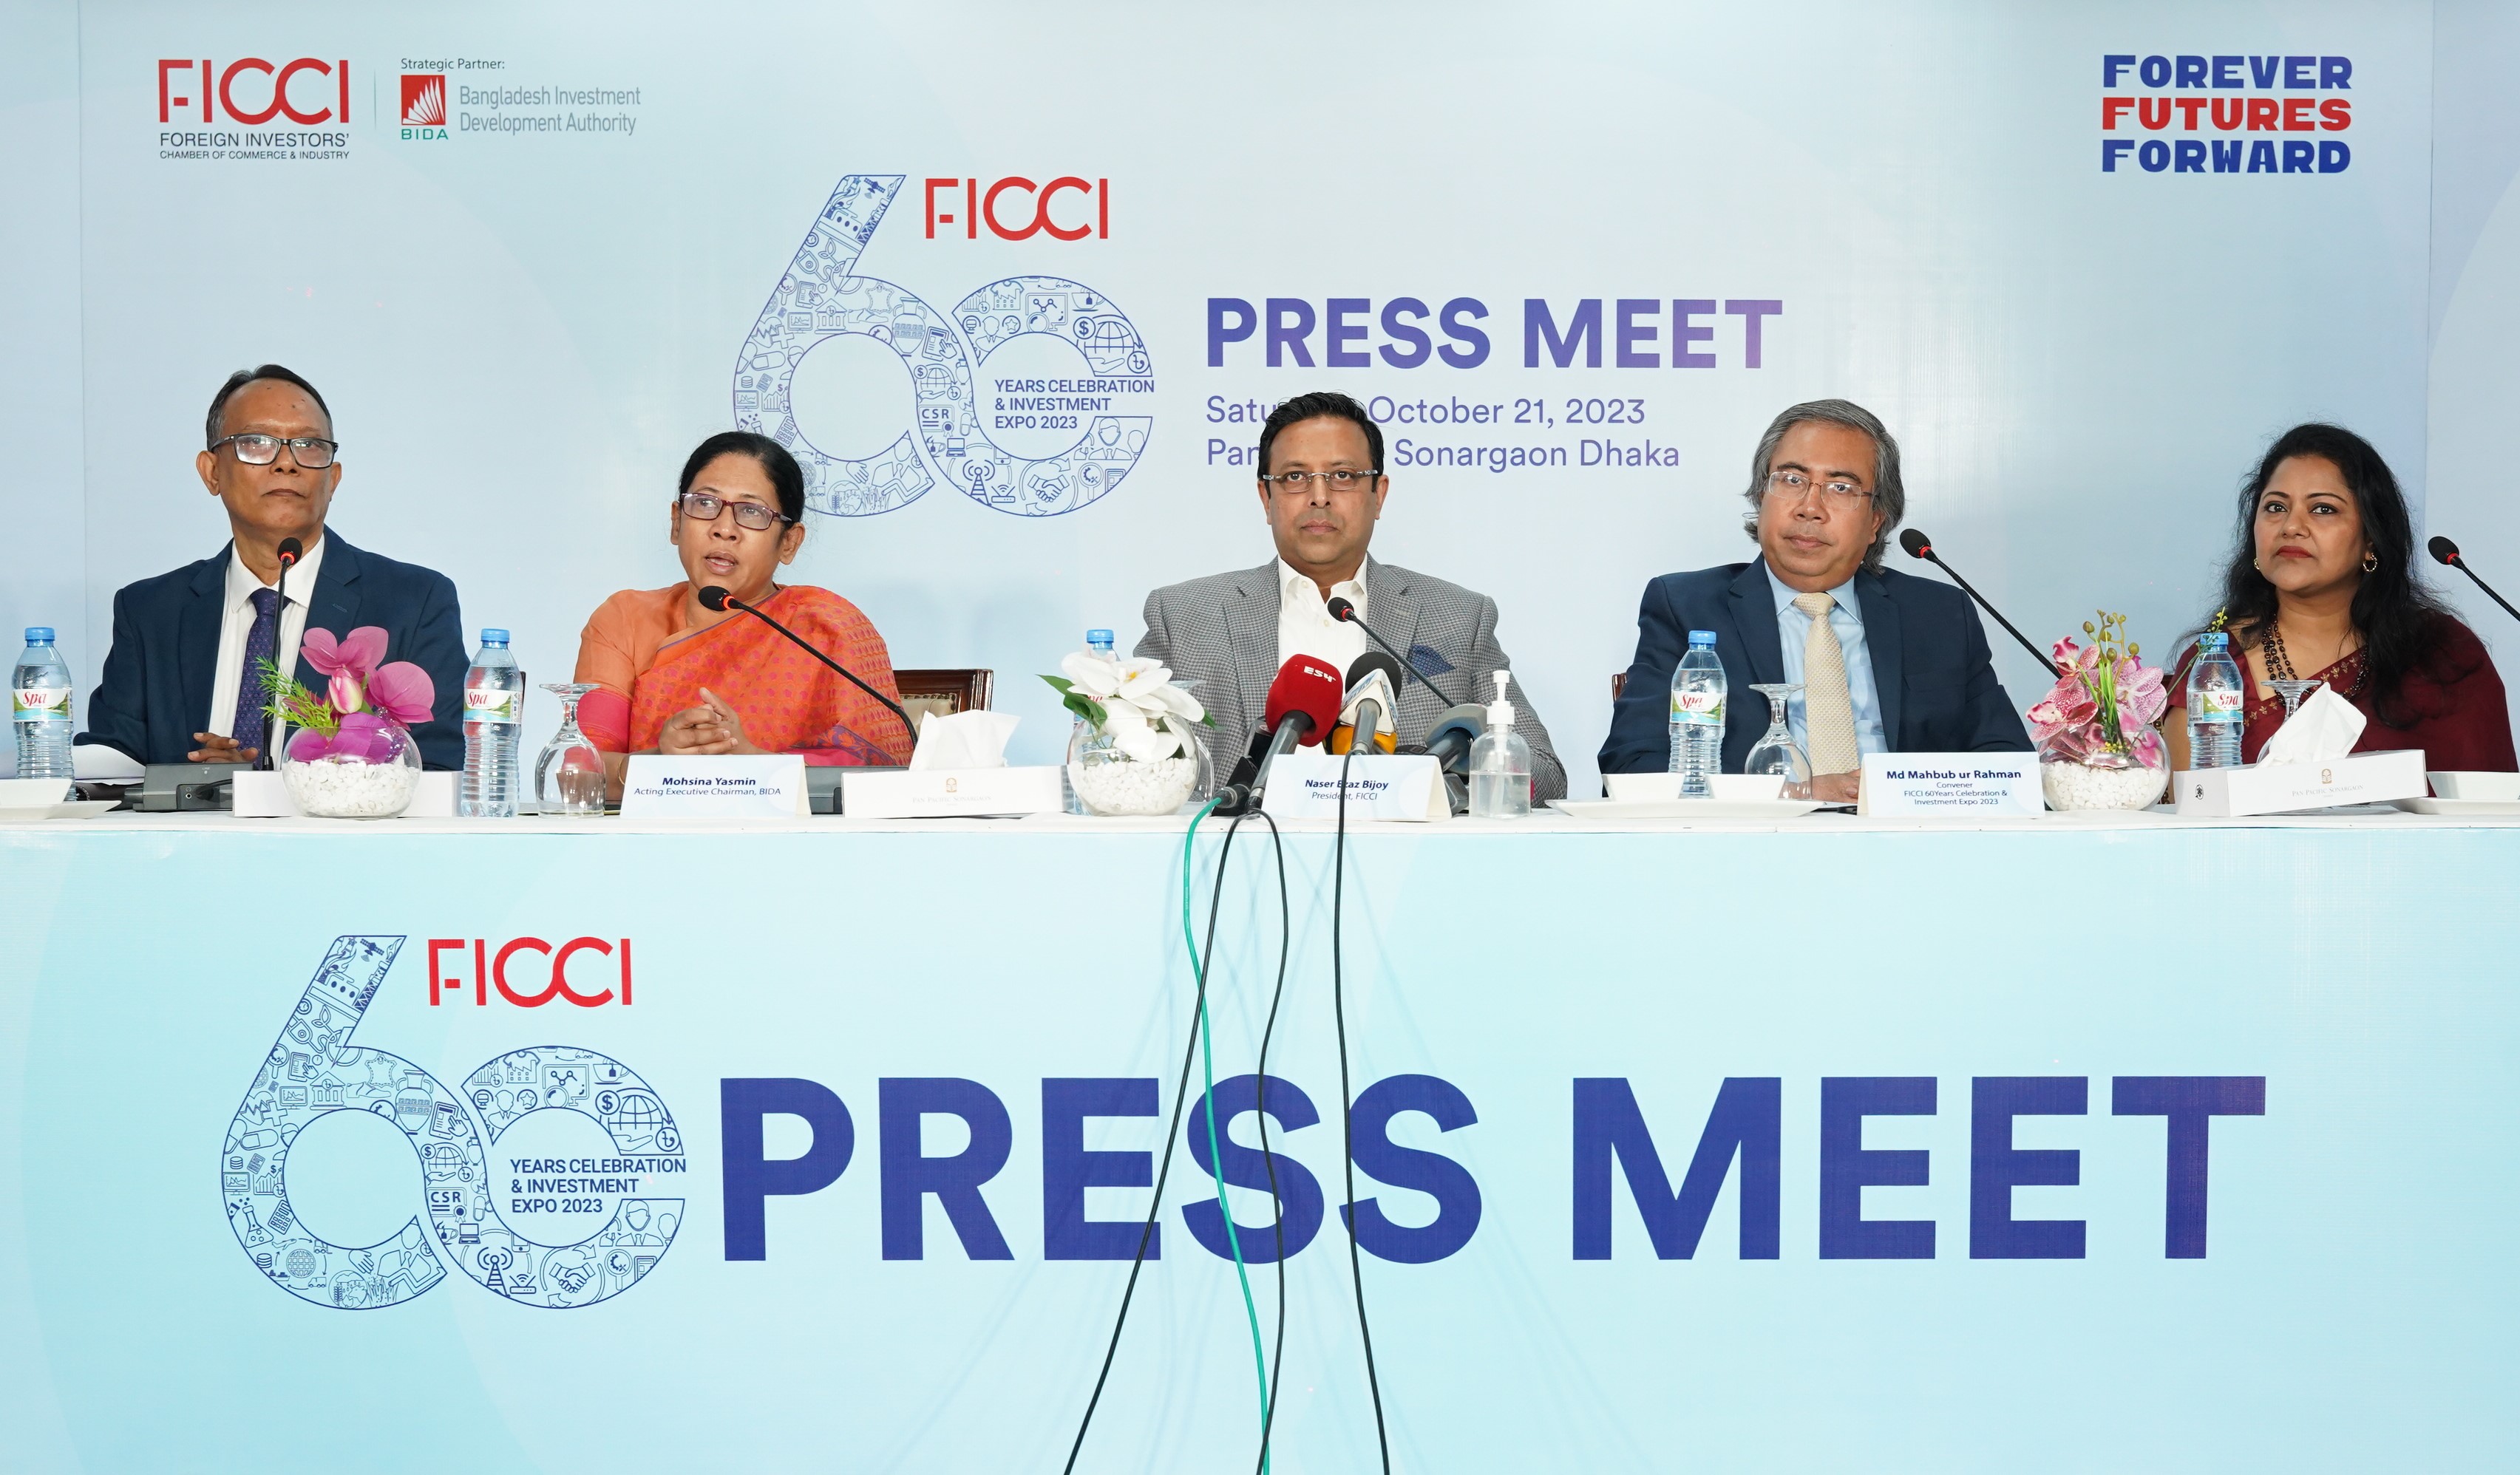 FICCI 60 Years Celebration & Investment Expo 2023 to kick off on November 8